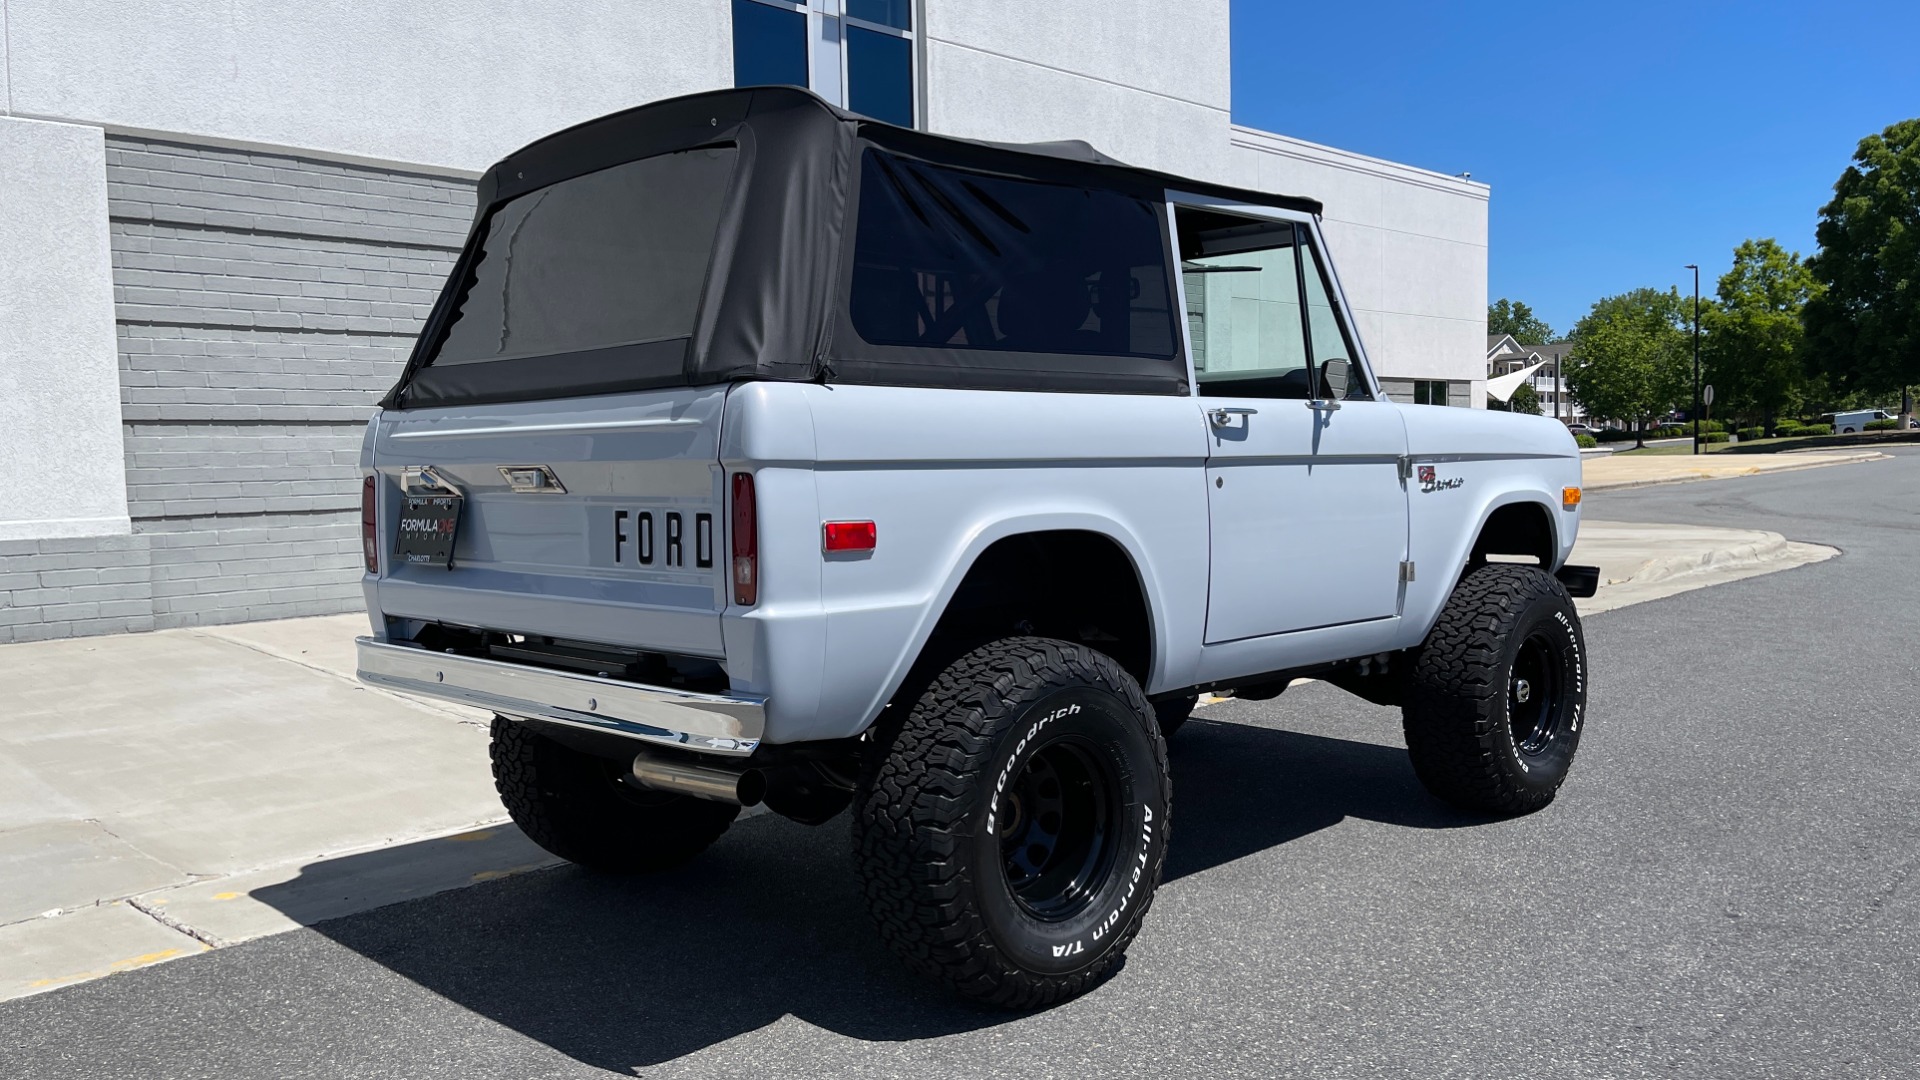 Used 1976 Ford BRONCO RESTO-MOD 4X4 / COYOTE 5.0L / AUTO / HTD STS / ALL NEW / LOW MILES for sale $239,999 at Formula Imports in Charlotte NC 28227 6